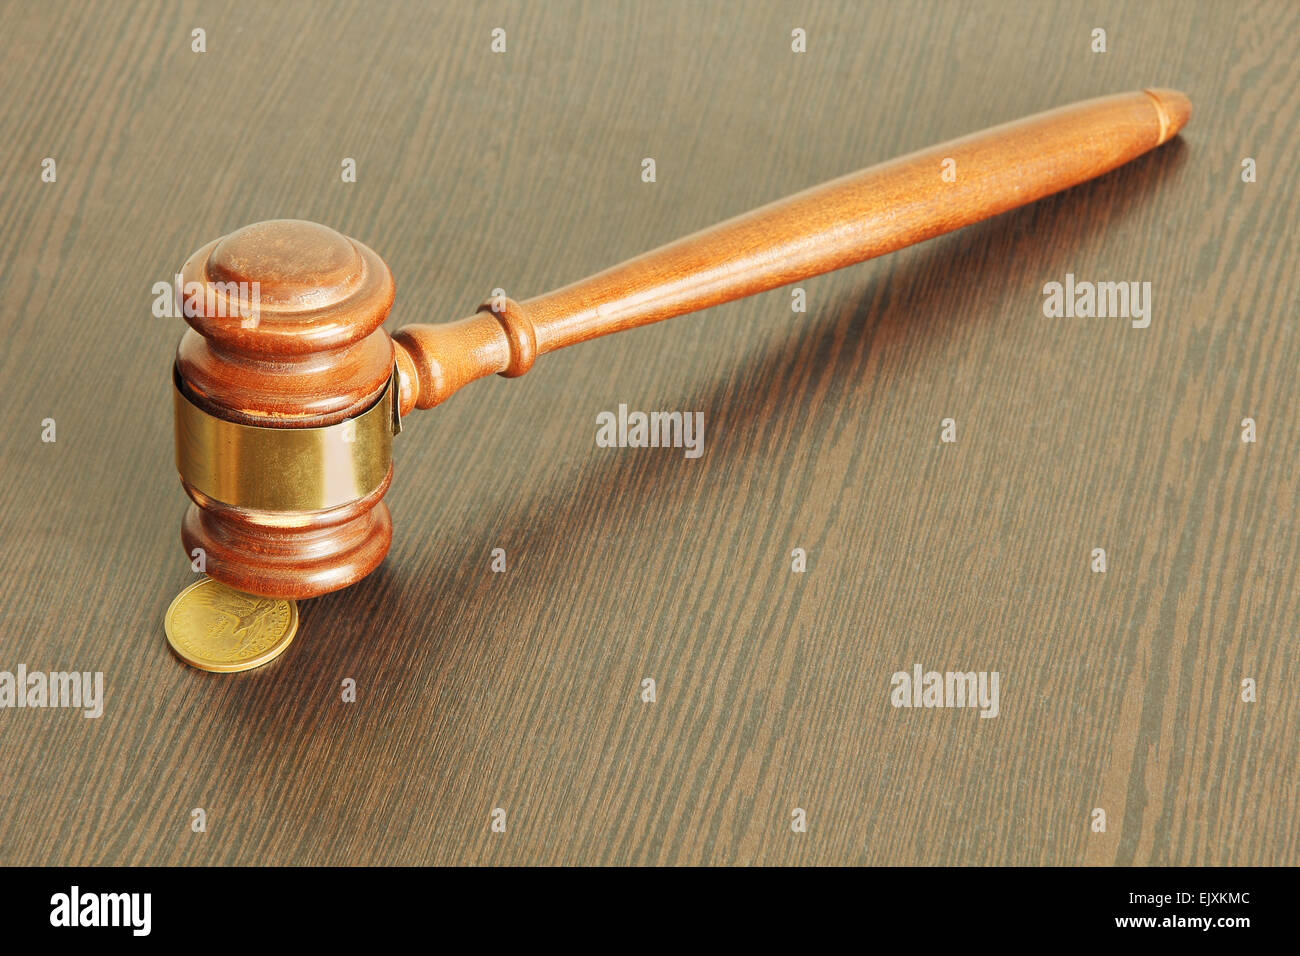 Auction hammer or judge gavel and one dollar coin on wooden table taken closeup. Stock Photo